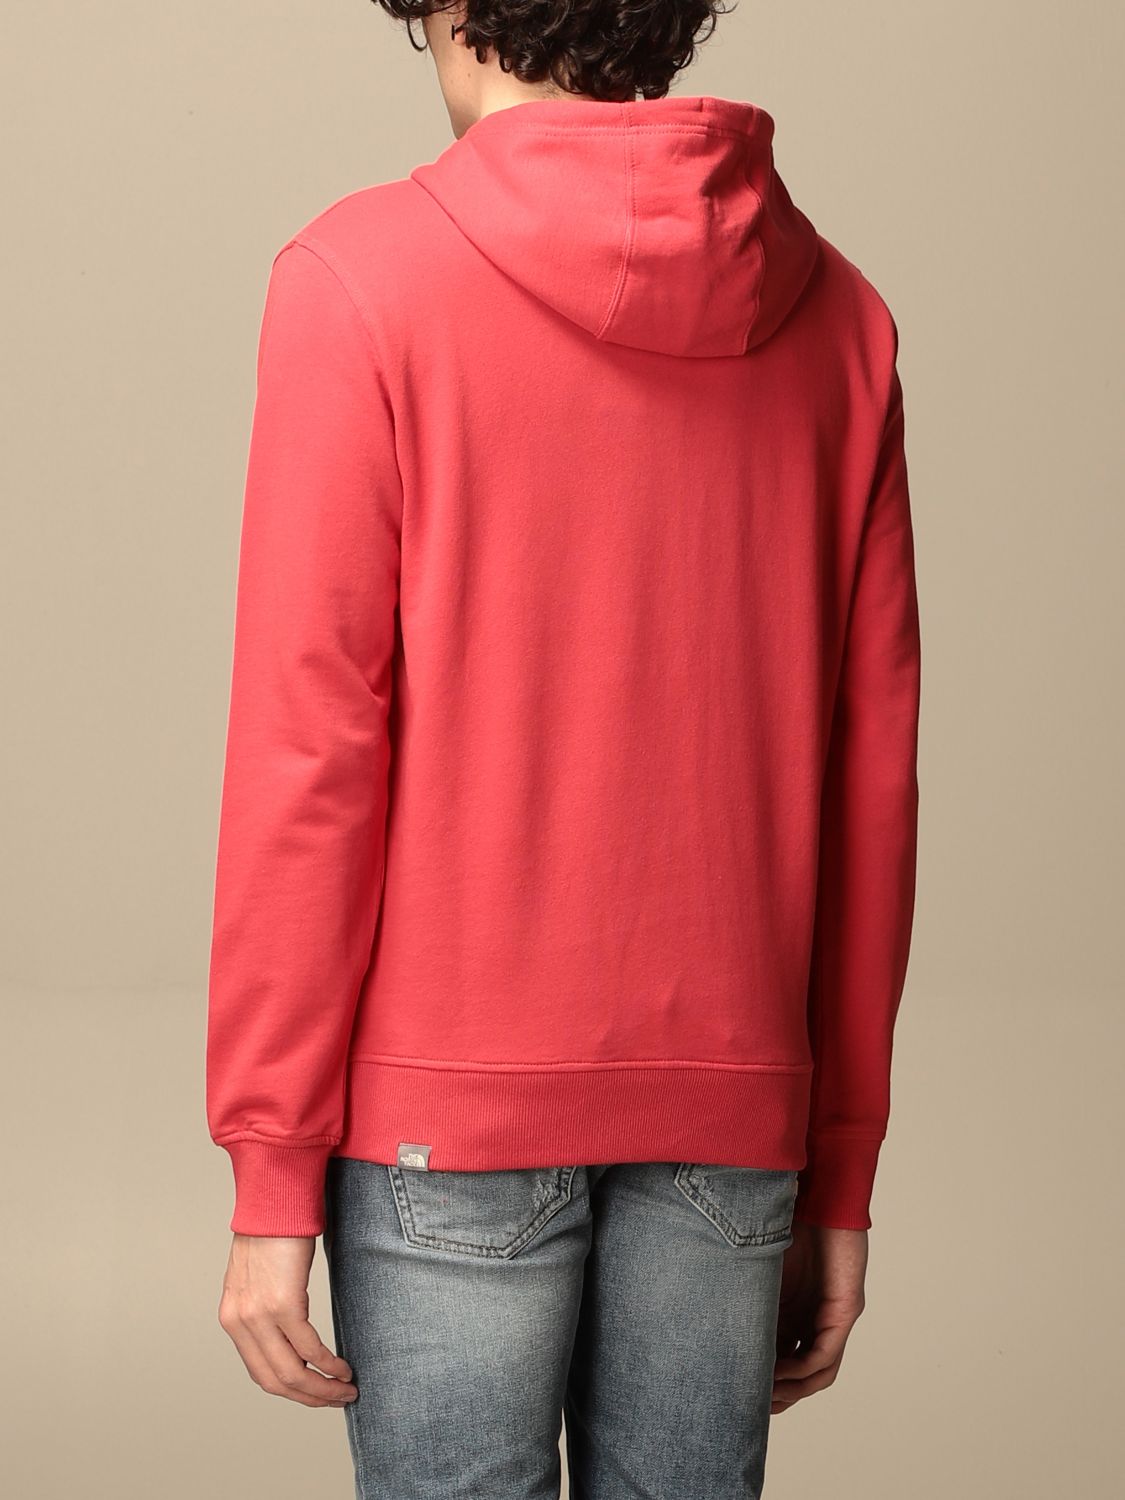 Sweatshirt The North Face: Sweatshirt homme The North Face rouge 2